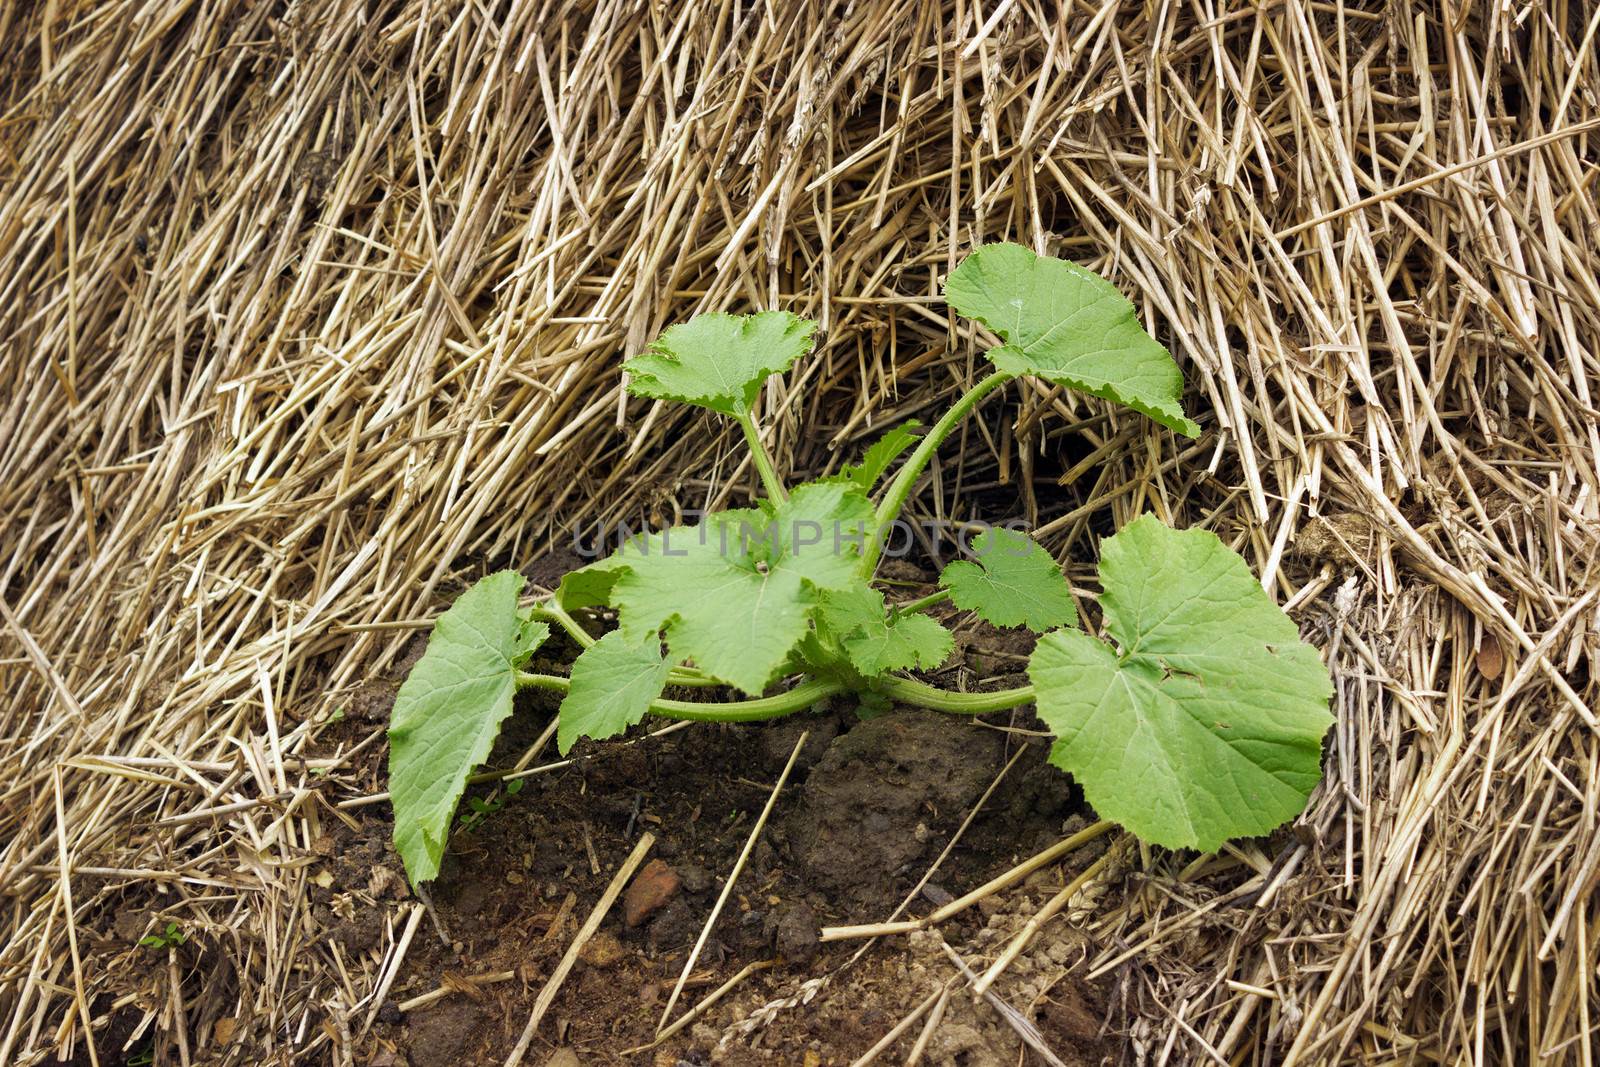 Zucchini plants grown on a pile of straw